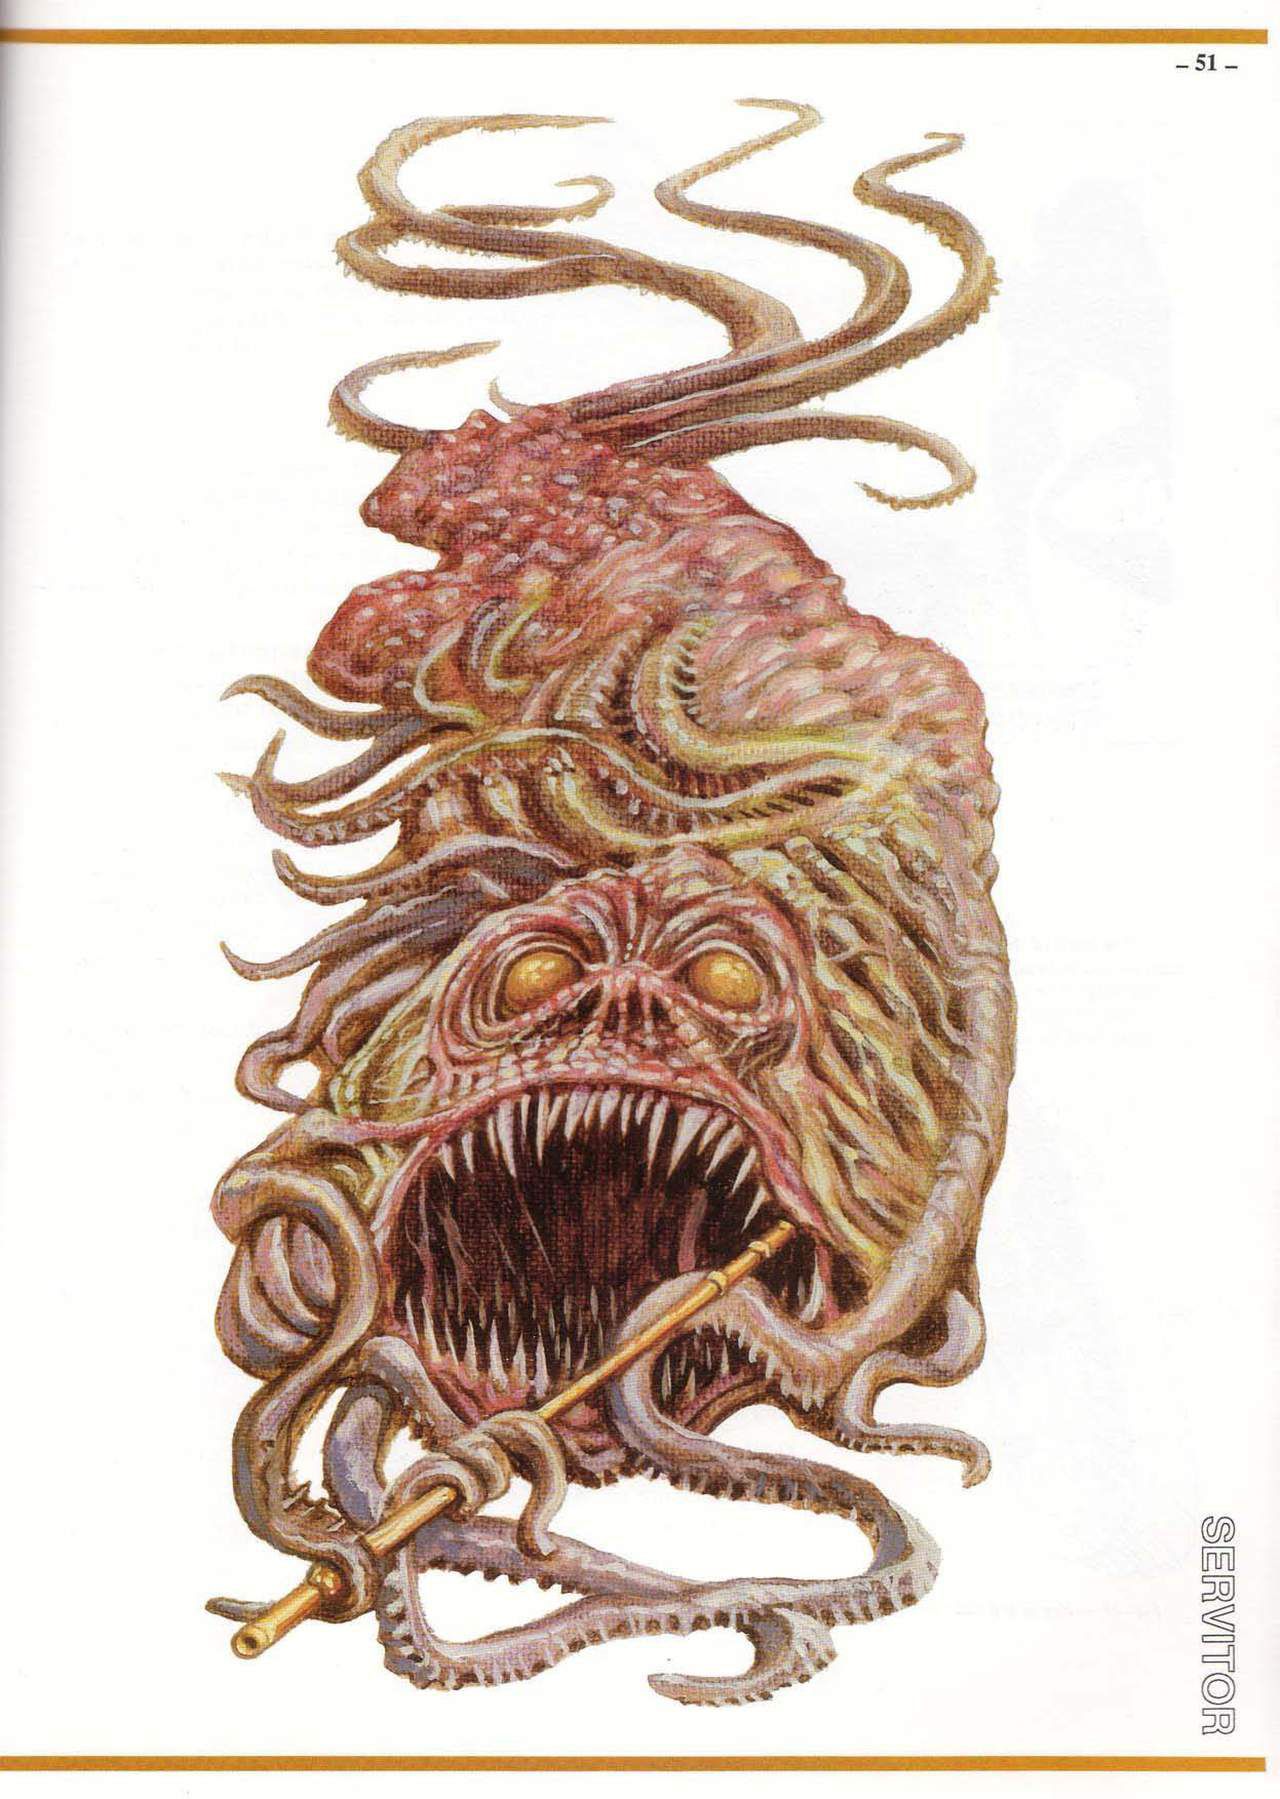 S. Petersen's Field Guide to Lovecraftian Horrors 51